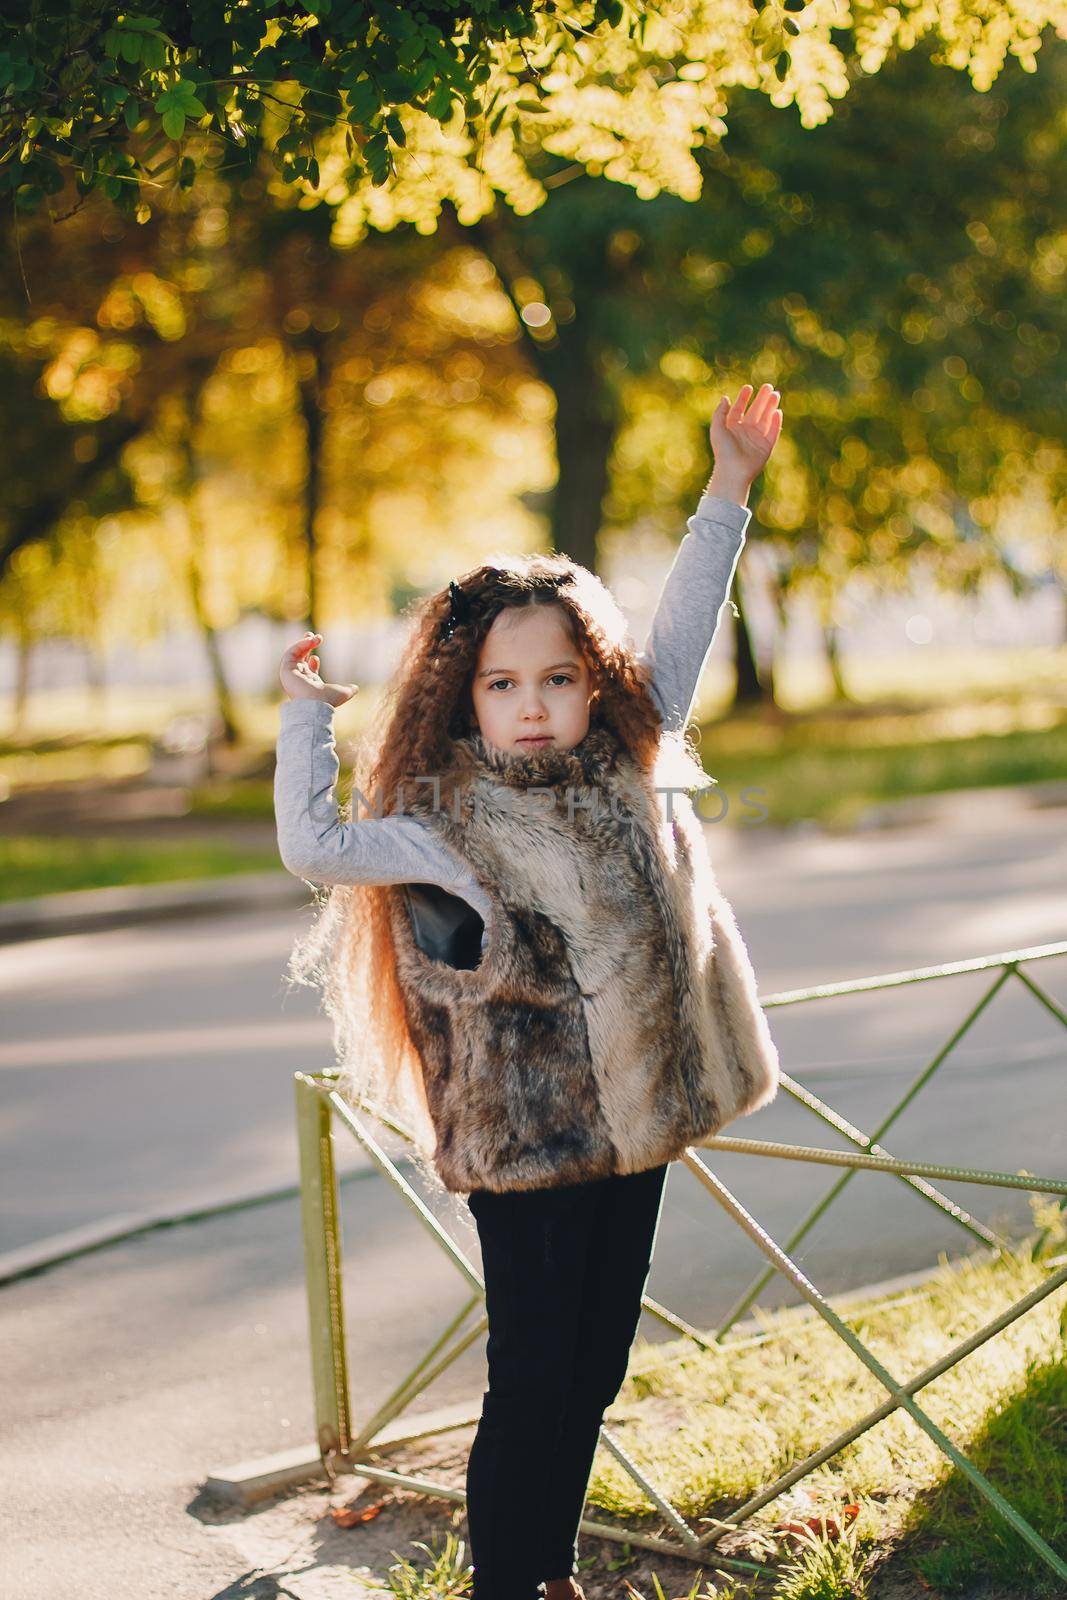 Stylish baby girl 4-5 year old wearing boots, fur coat standing in park. Looking at camera. Autumn fall season by mmp1206